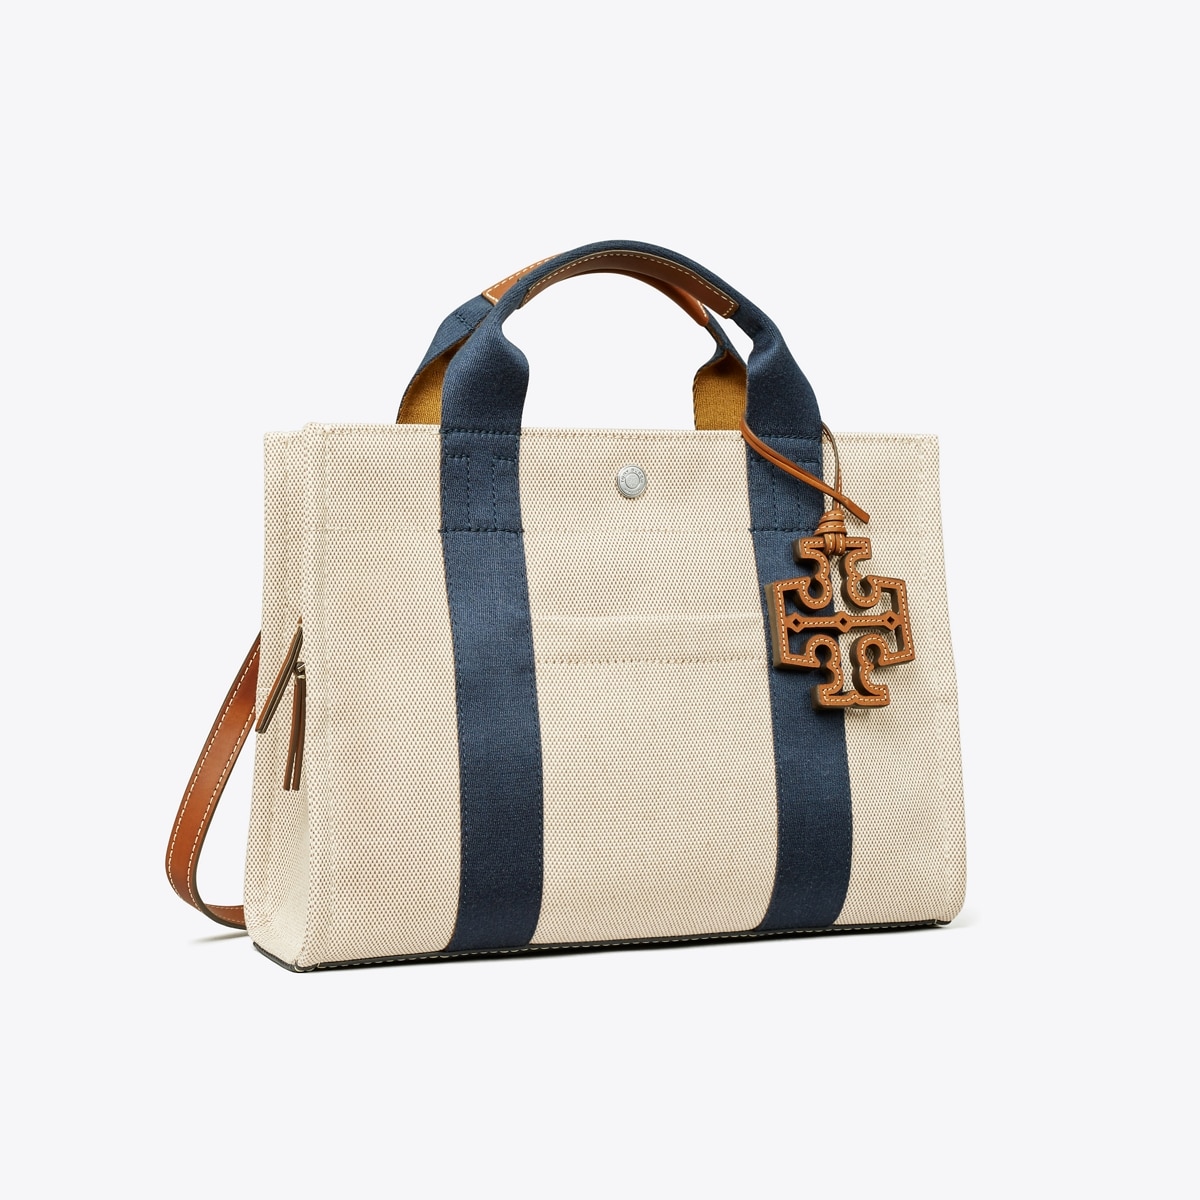 Total 57+ imagen tory burch small leather tote - Abzlocal.mx